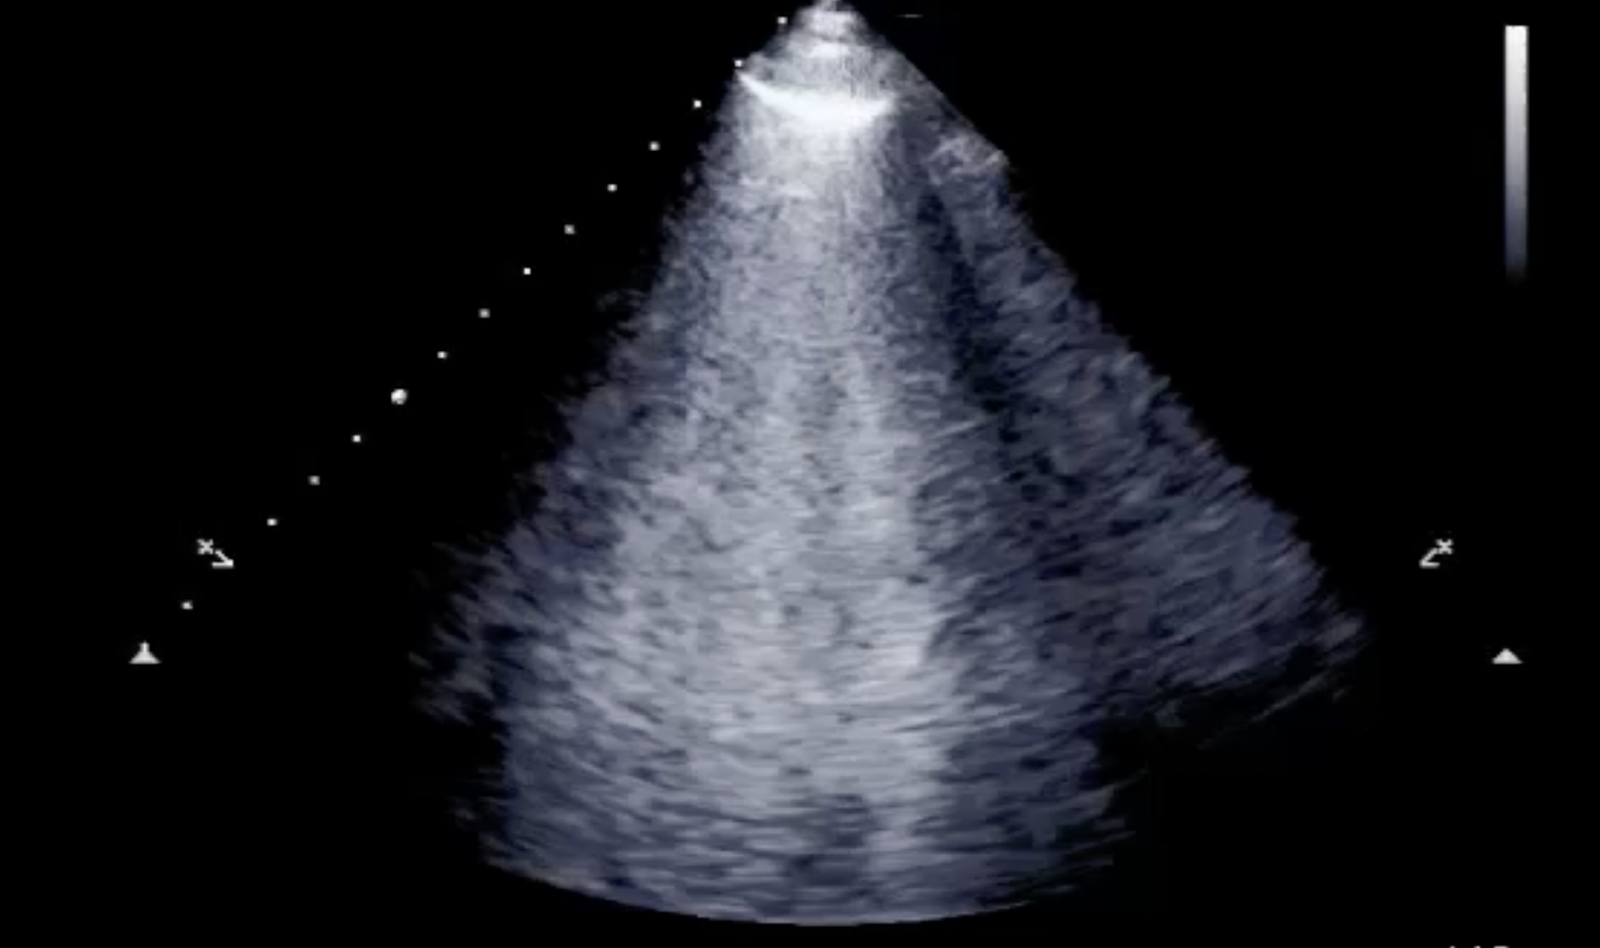 Image of point of care ultrasound lung ultrasound COVID 19    Online PoCUS Training